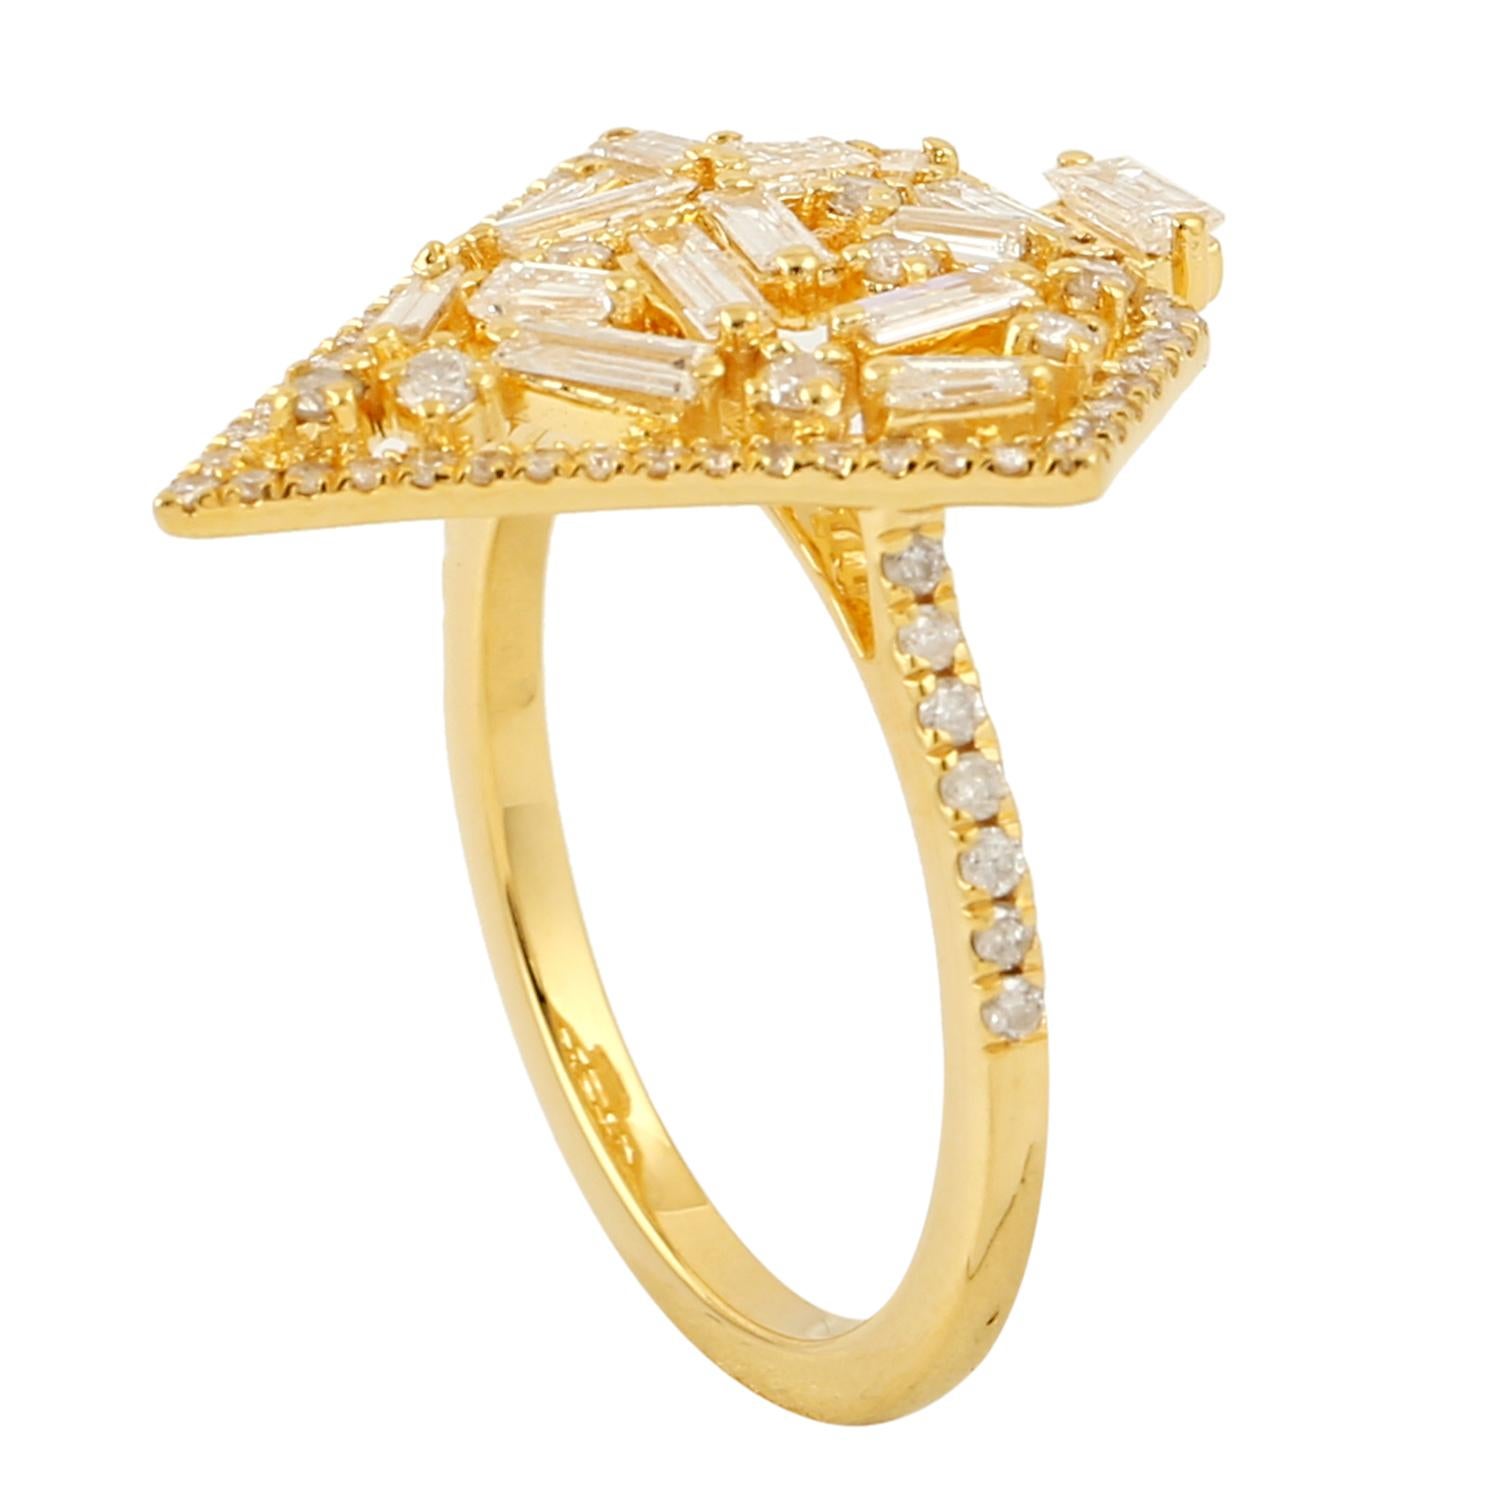 Art Nouveau Pentagon Shaped Baguette Diamonds Ring With Pave Diamonds In 18k yellow Gold For Sale